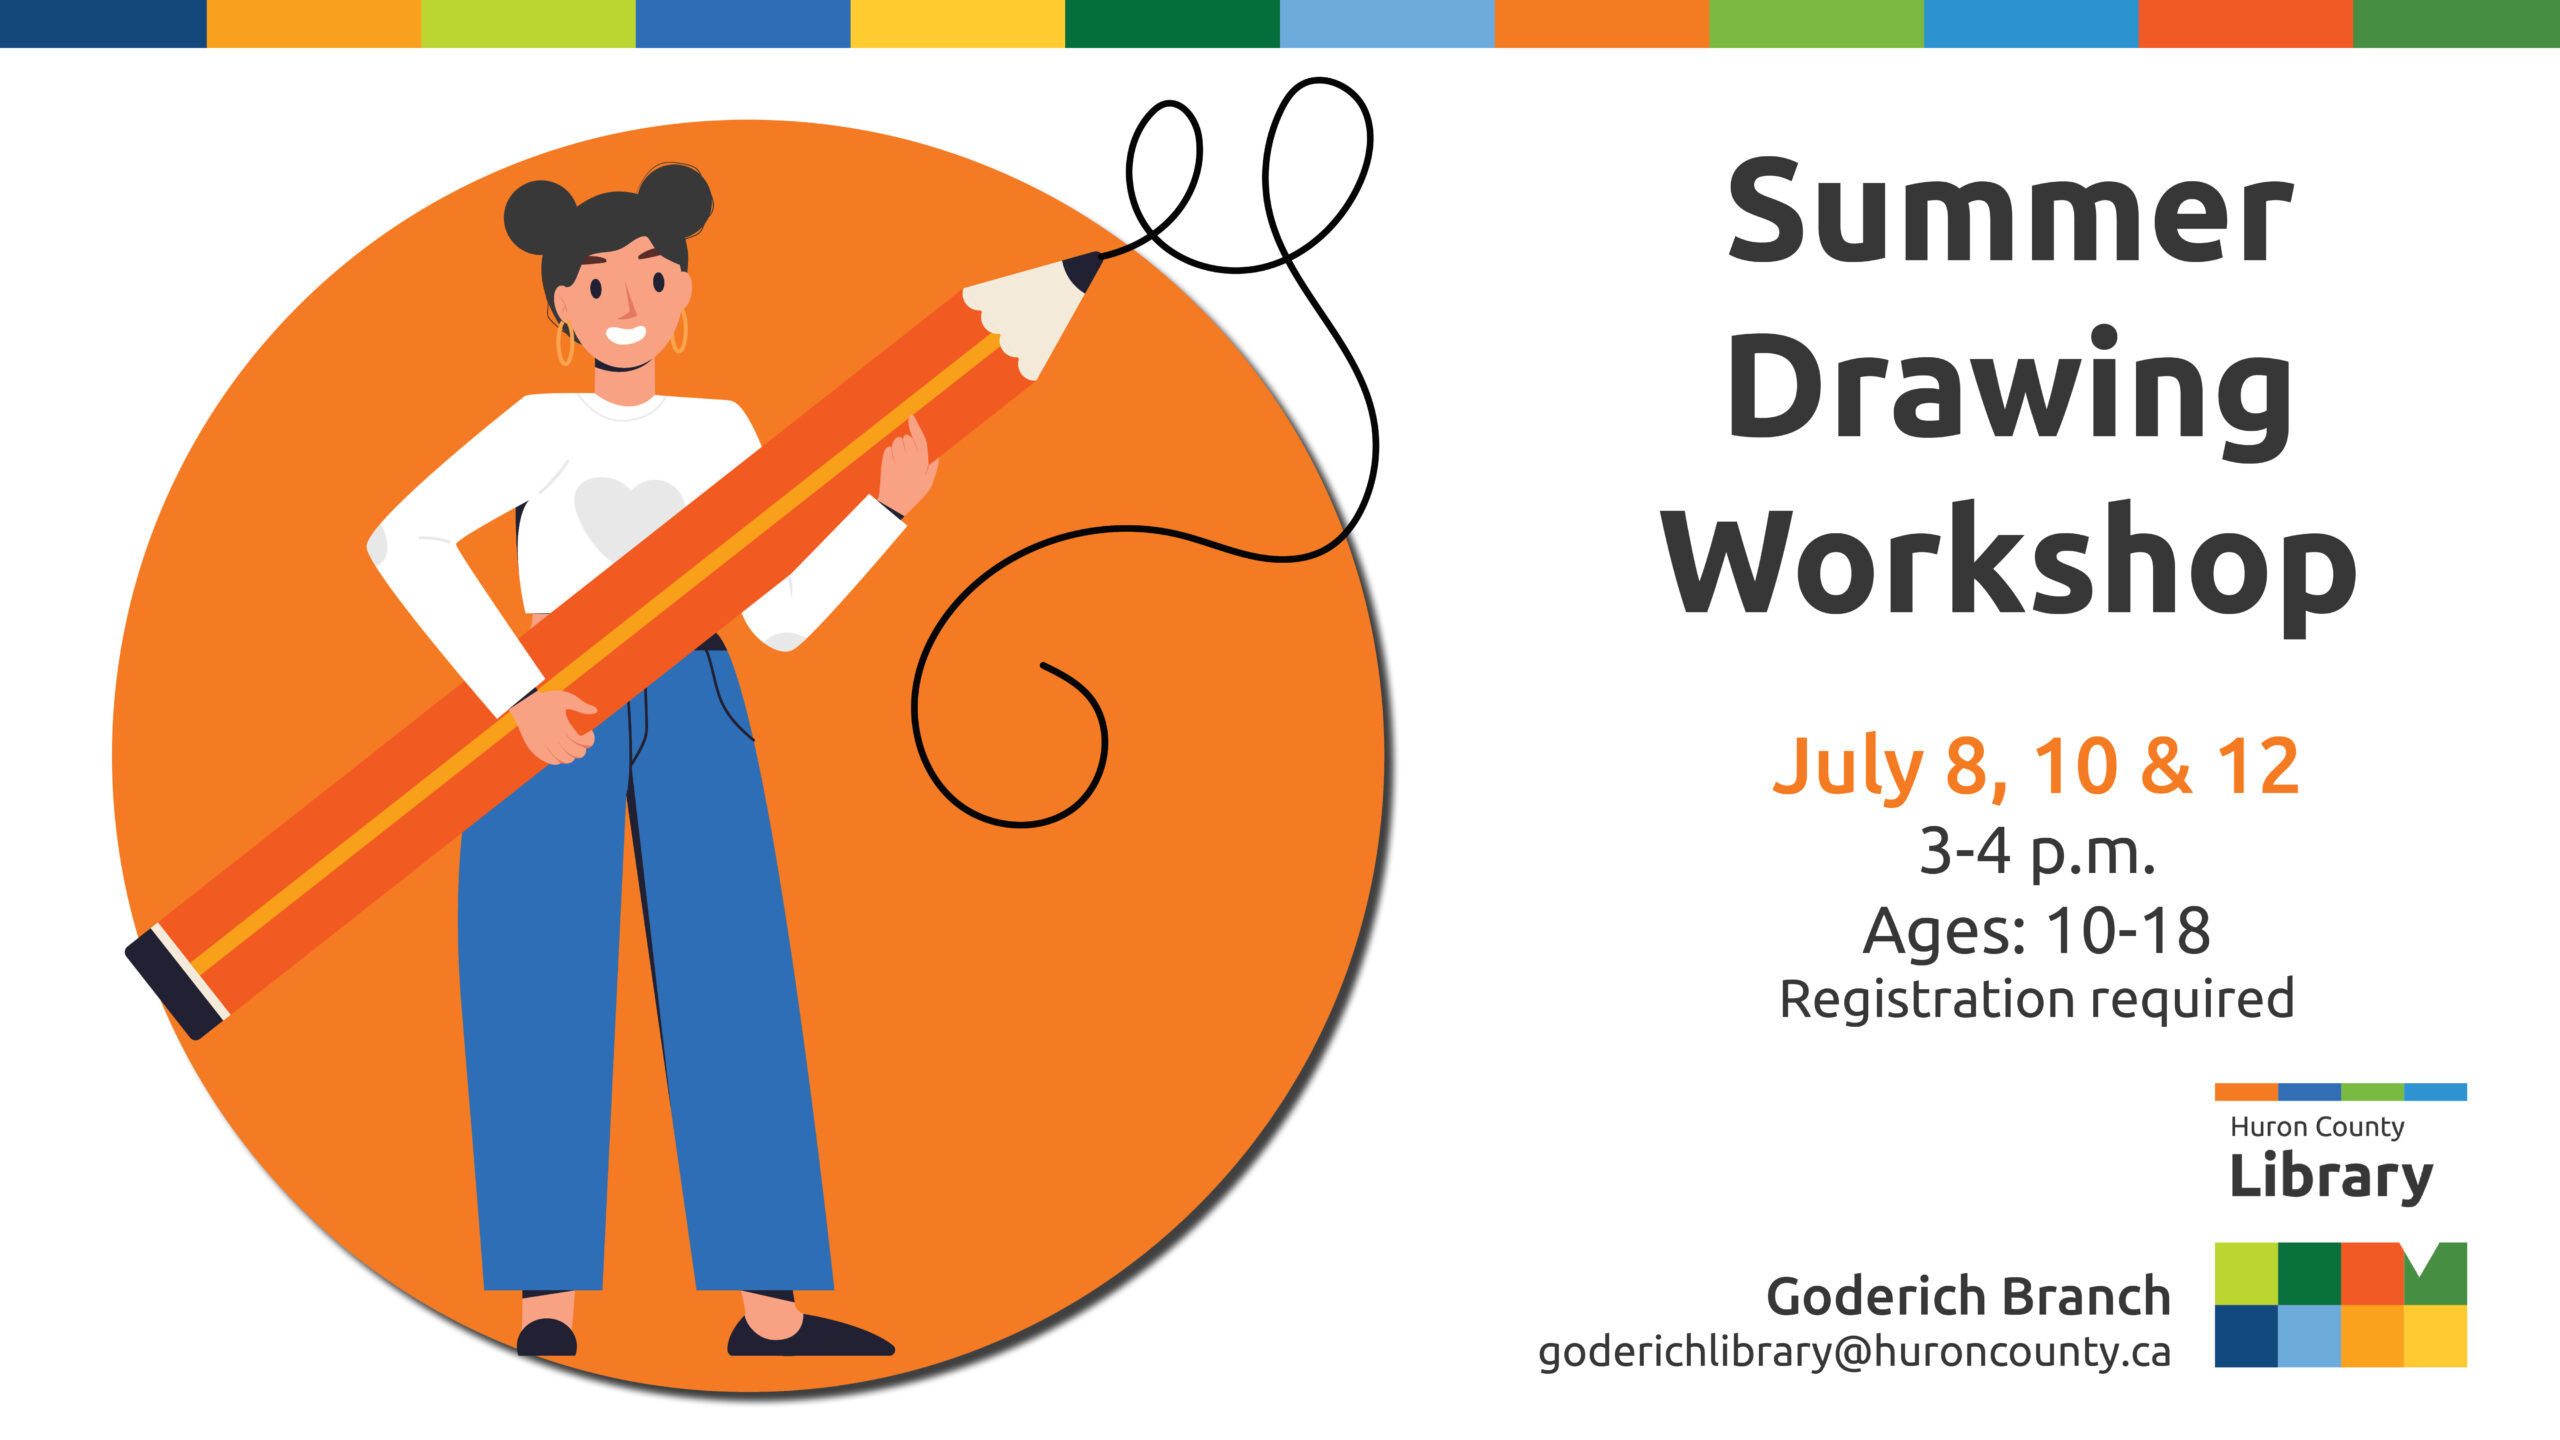 Illustration of a teen holding a pencil with text promoting summer drawing workshop for kids at Goderich